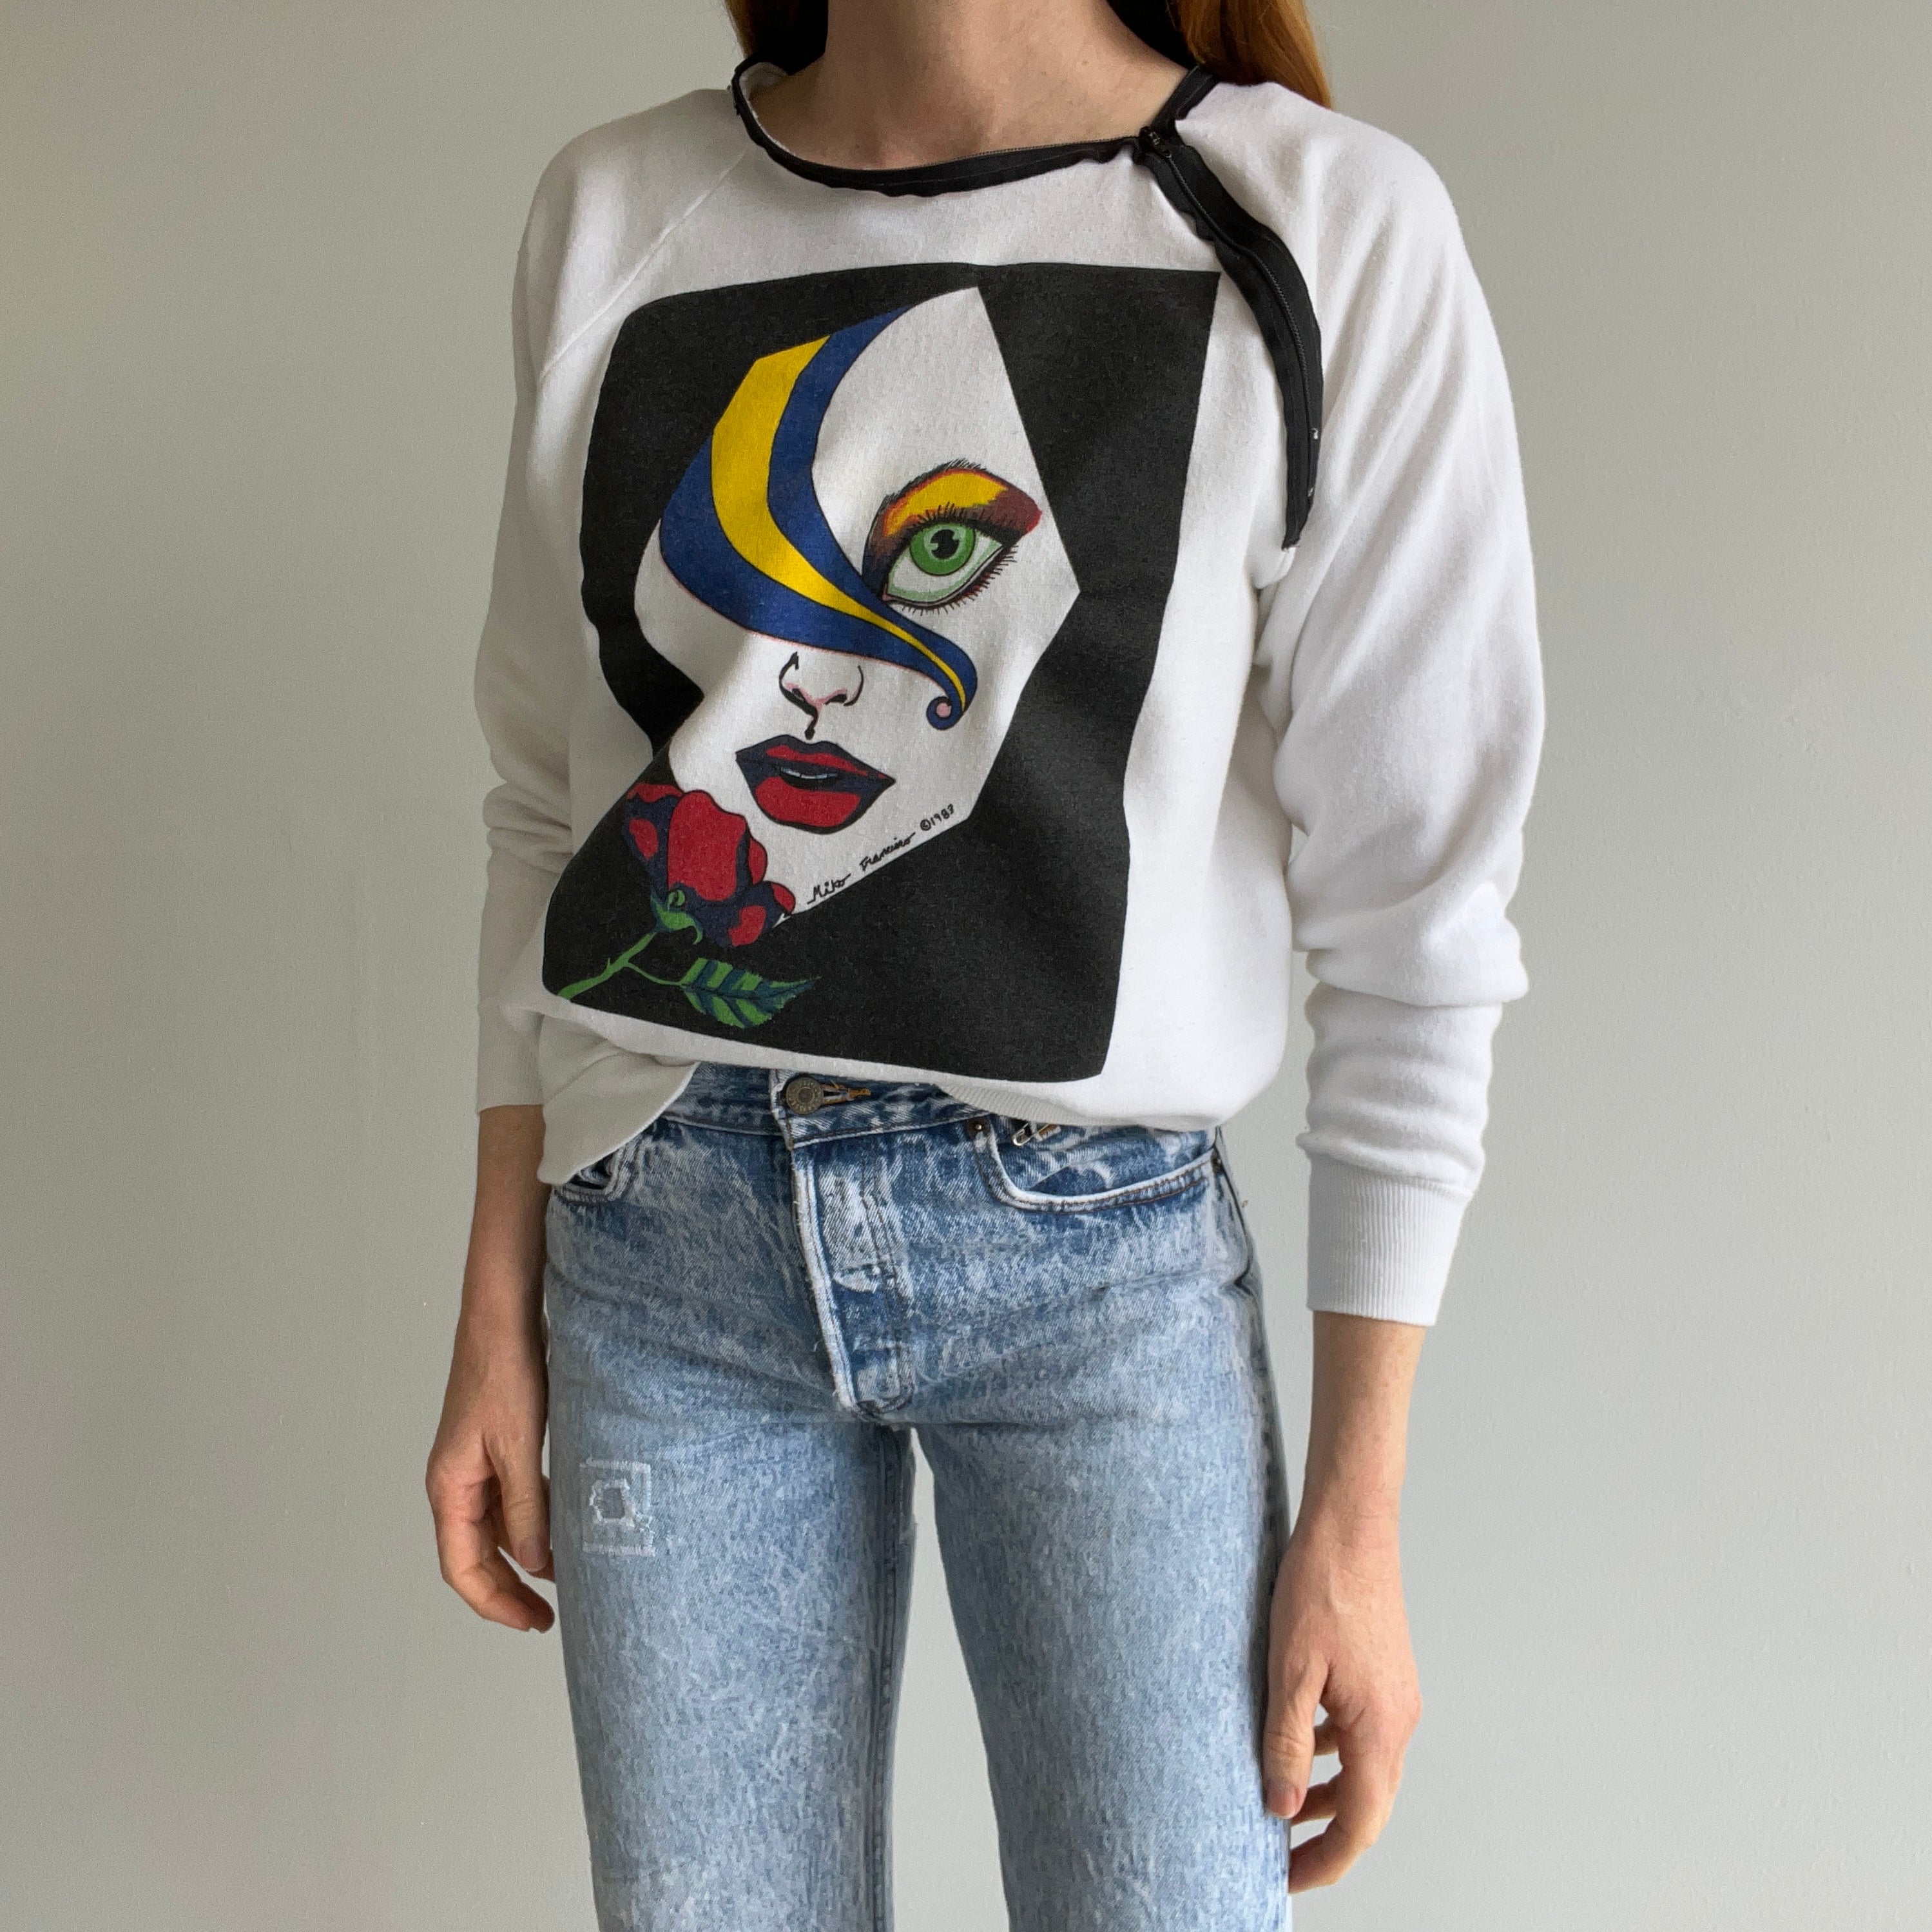 1989 Very Unique WOW, Weird and Maybe Wonderful Depending On Who You Ask - Sweatshirt with a Zipper Collar